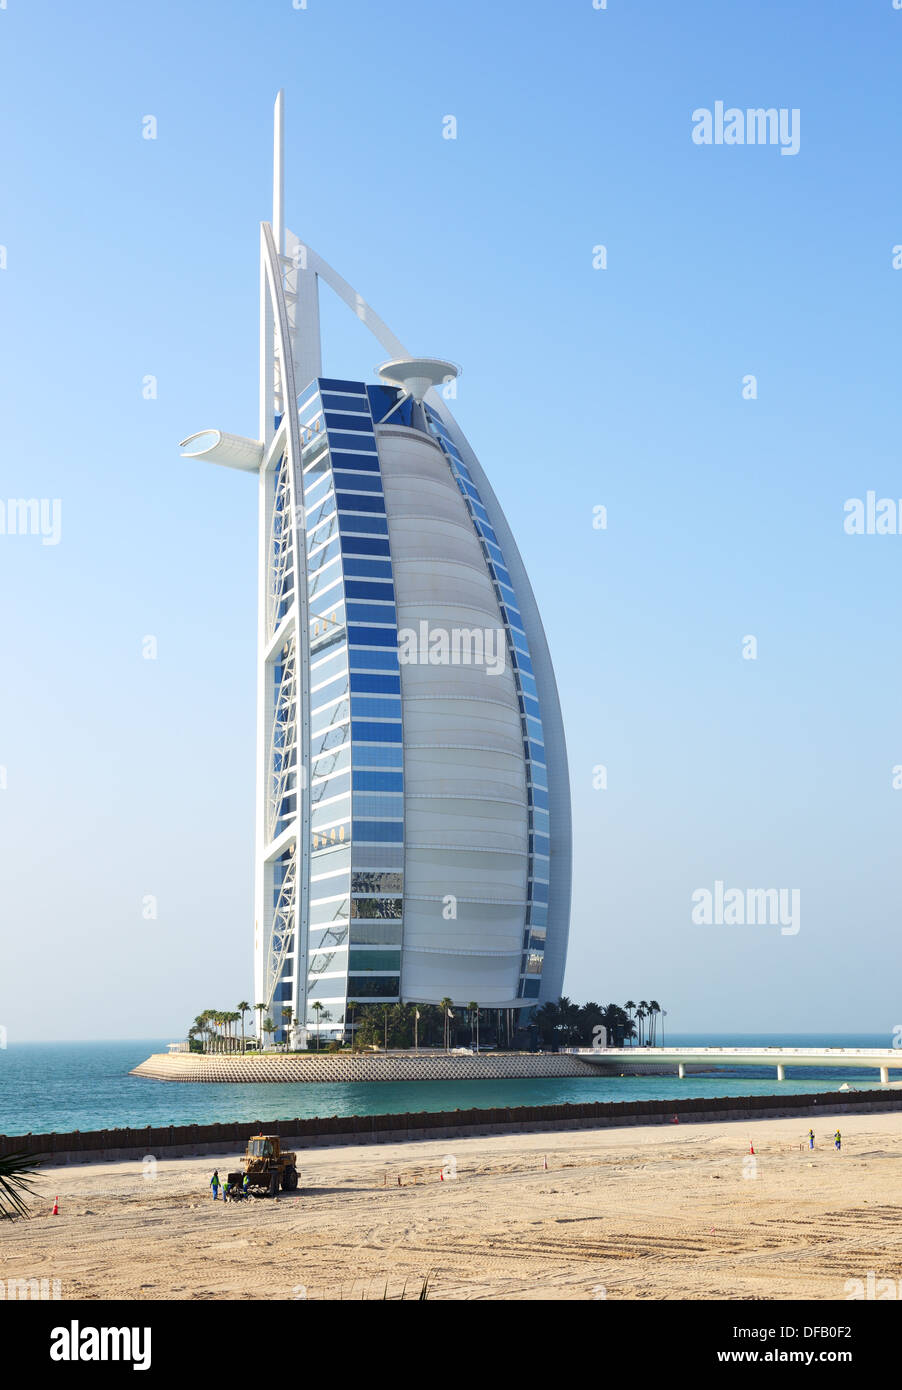 The view on world's first seven stars luxury hotel Burj Al Arab 'Tower of the Arabs' and construction site for a new hotel Stock Photo